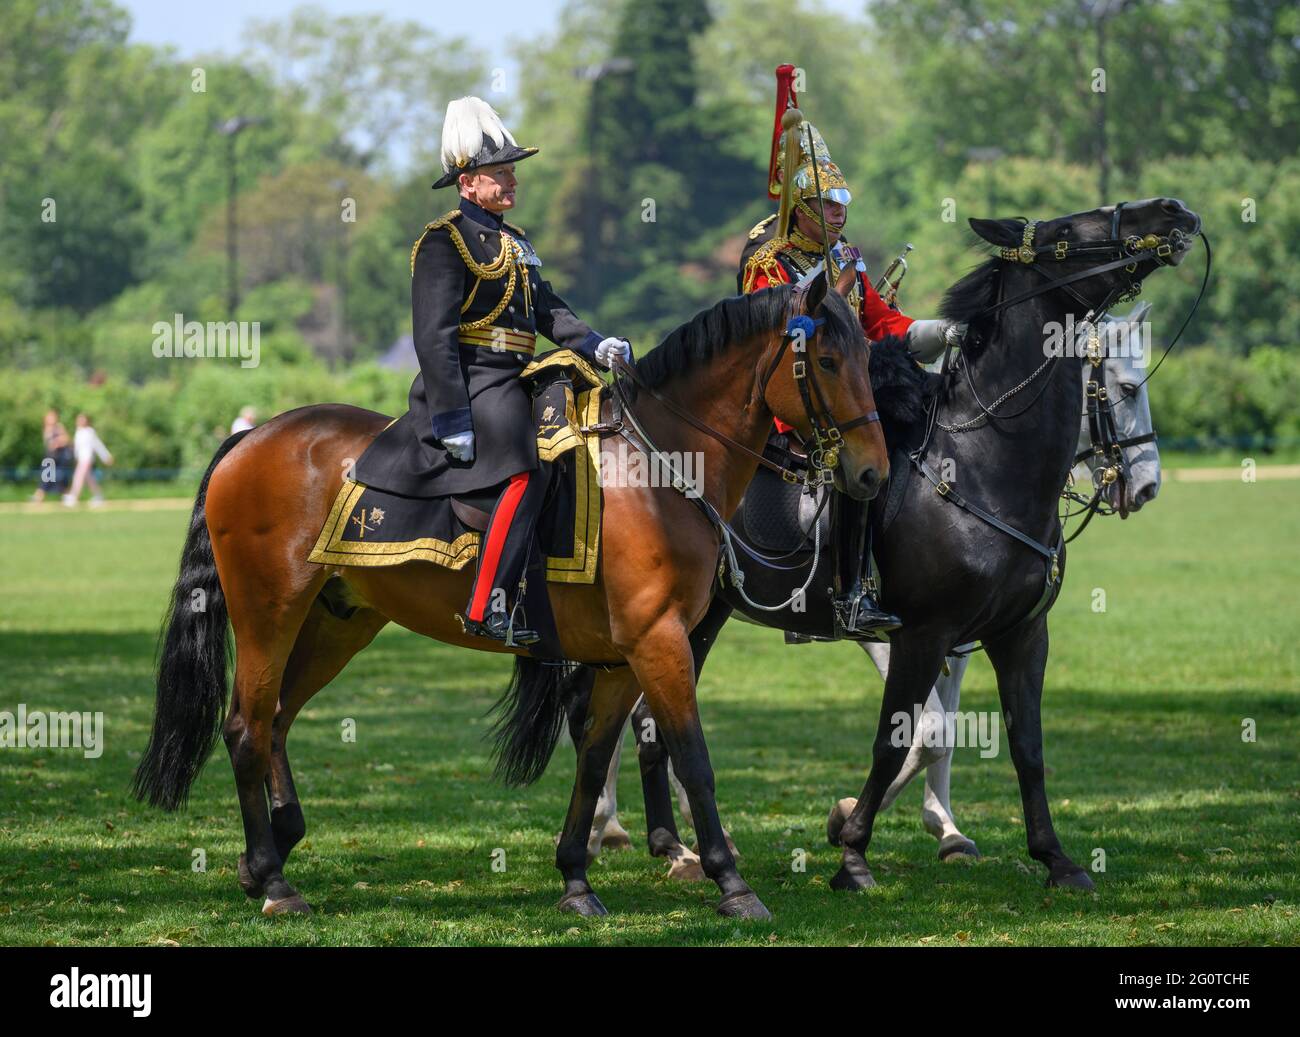 London, UK. 3 June 2021. 2021 Annual inspection of the Household Cavalry at Hyde Park by Major General Christopher John Ghika CBE the General Officer Commanding (pictured: white plume). Credit: Malcolm Park/Alamy Live News. Stock Photo